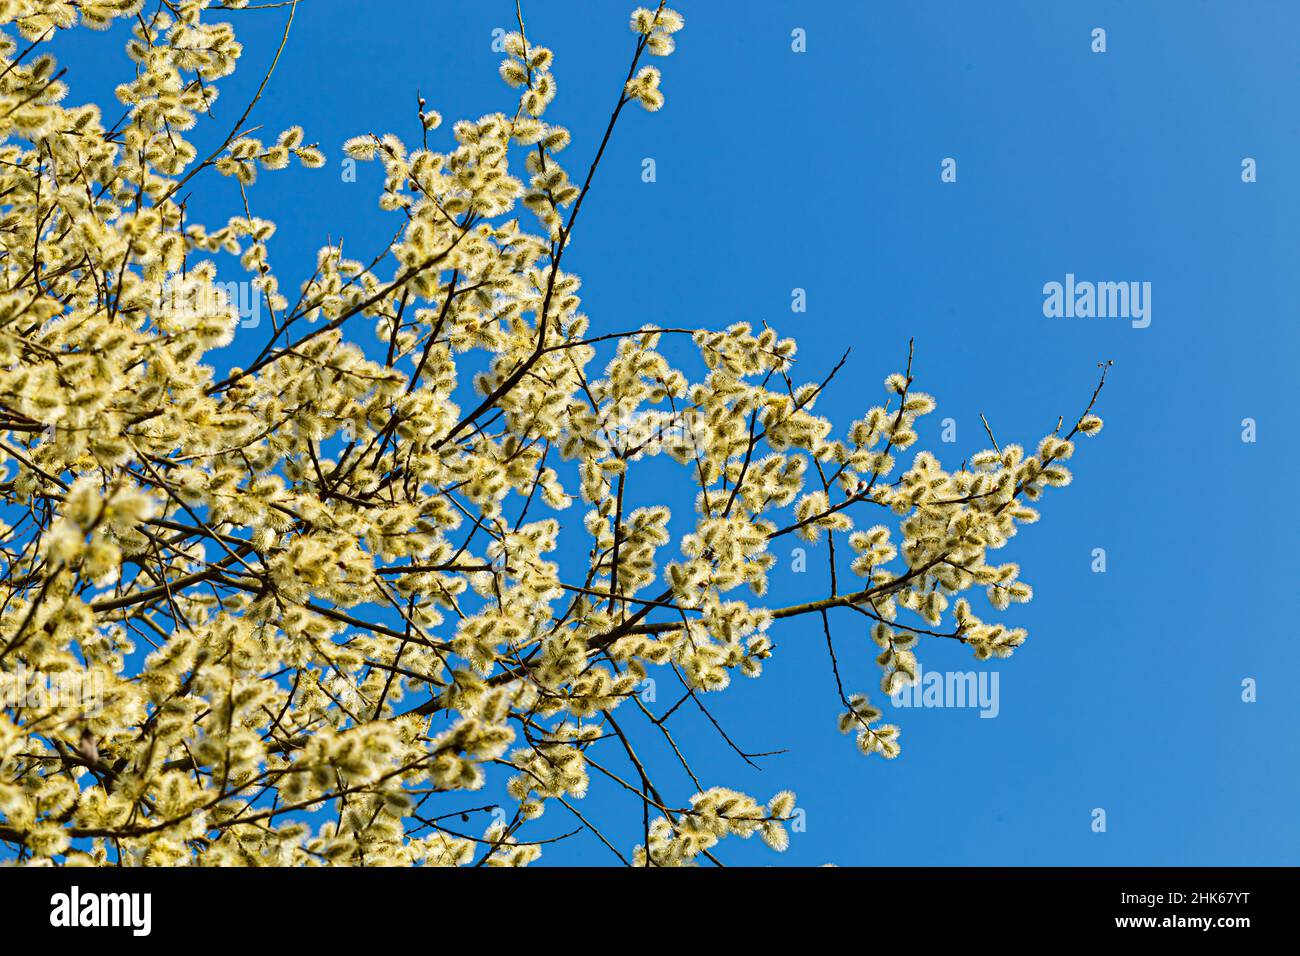 blossoming blooming blooming   catkin or ament on a branch of a spring tree against a blue sky Stock Photo